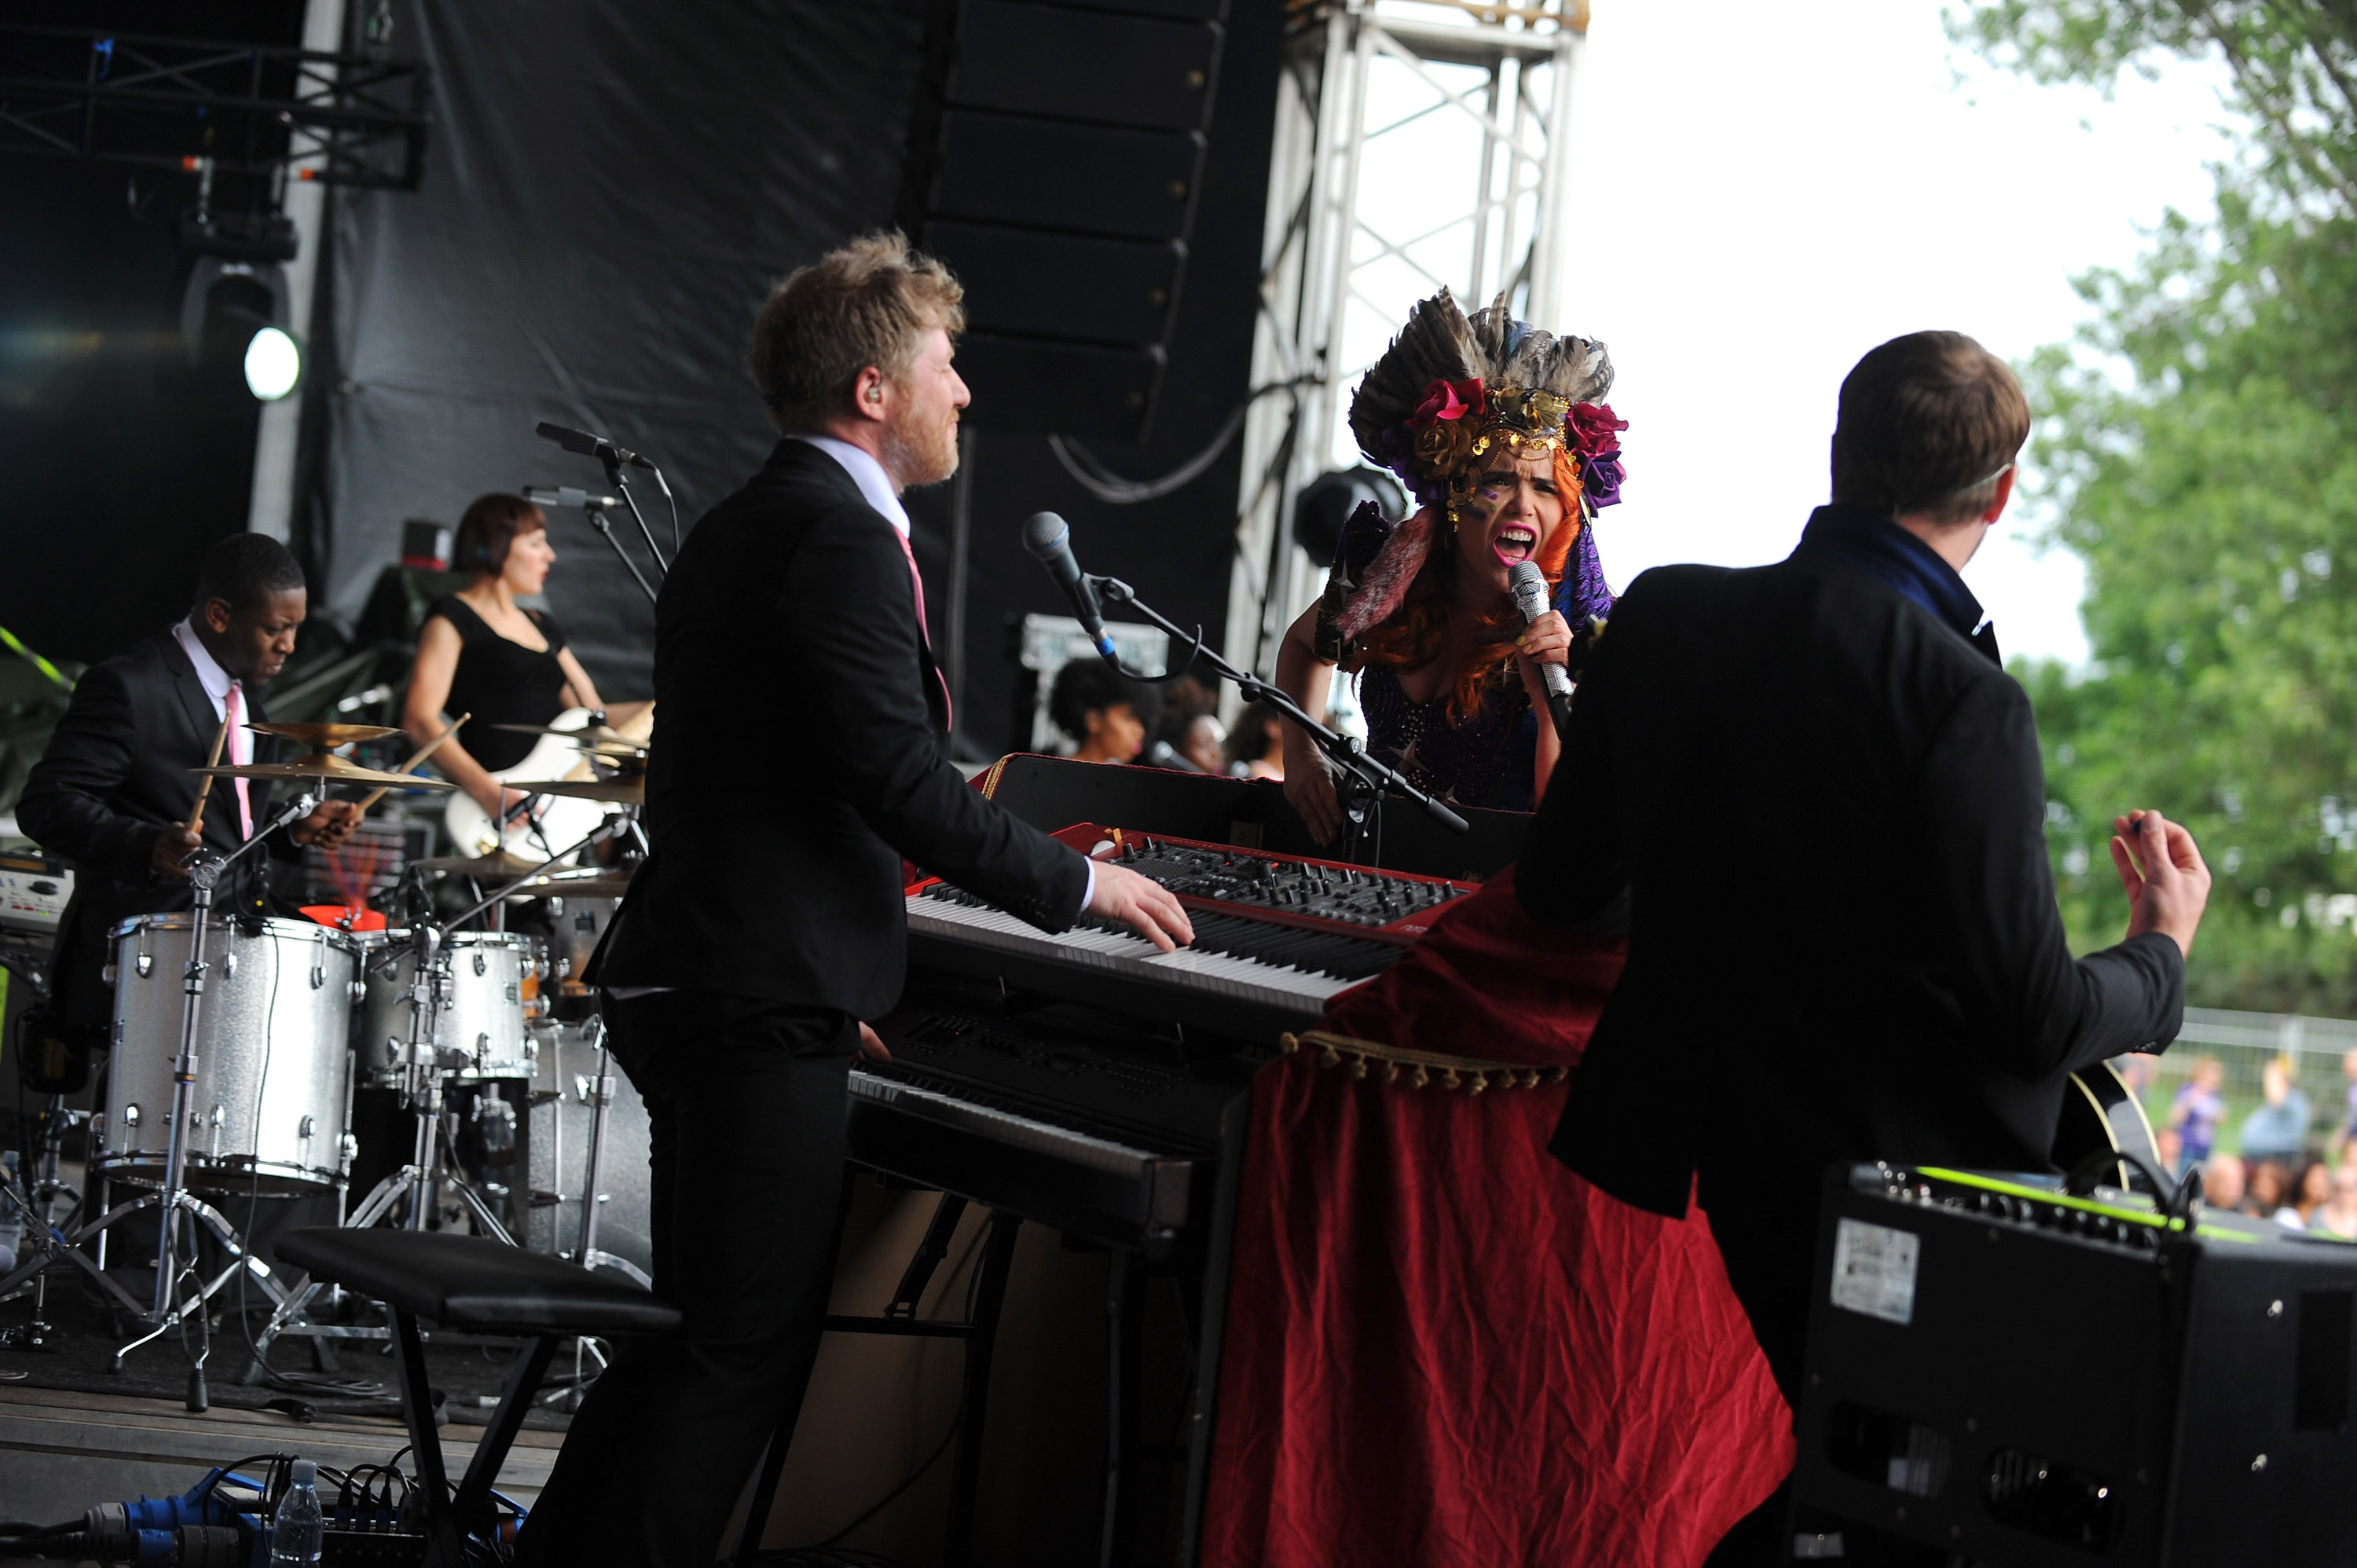 Paloma Faith Performing At The NPG Music And Arts Festival Copyright NPG Records 2011